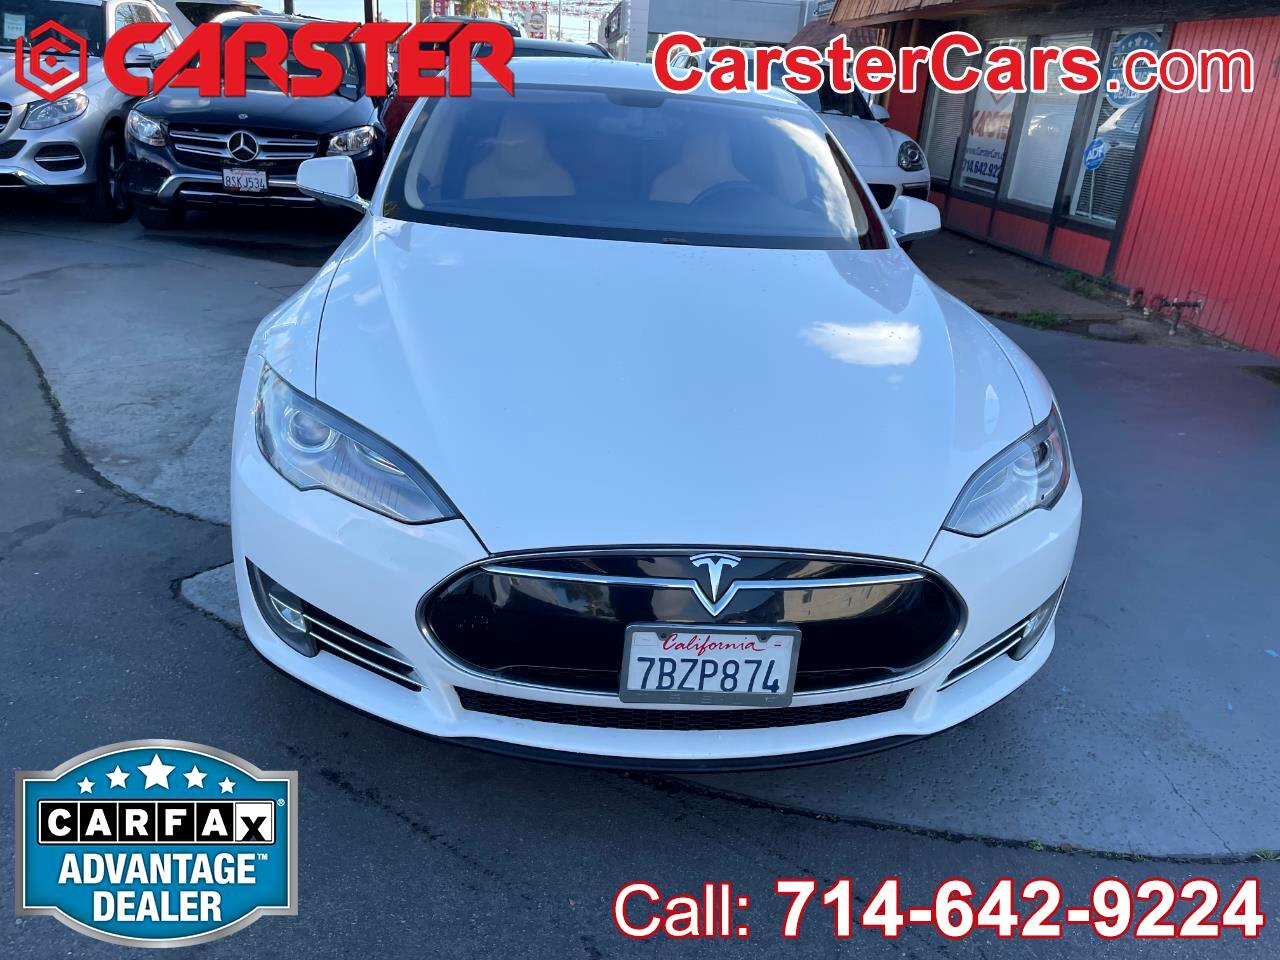 Tesla Model S 4dr Sdn 60 kWh Battery 2013